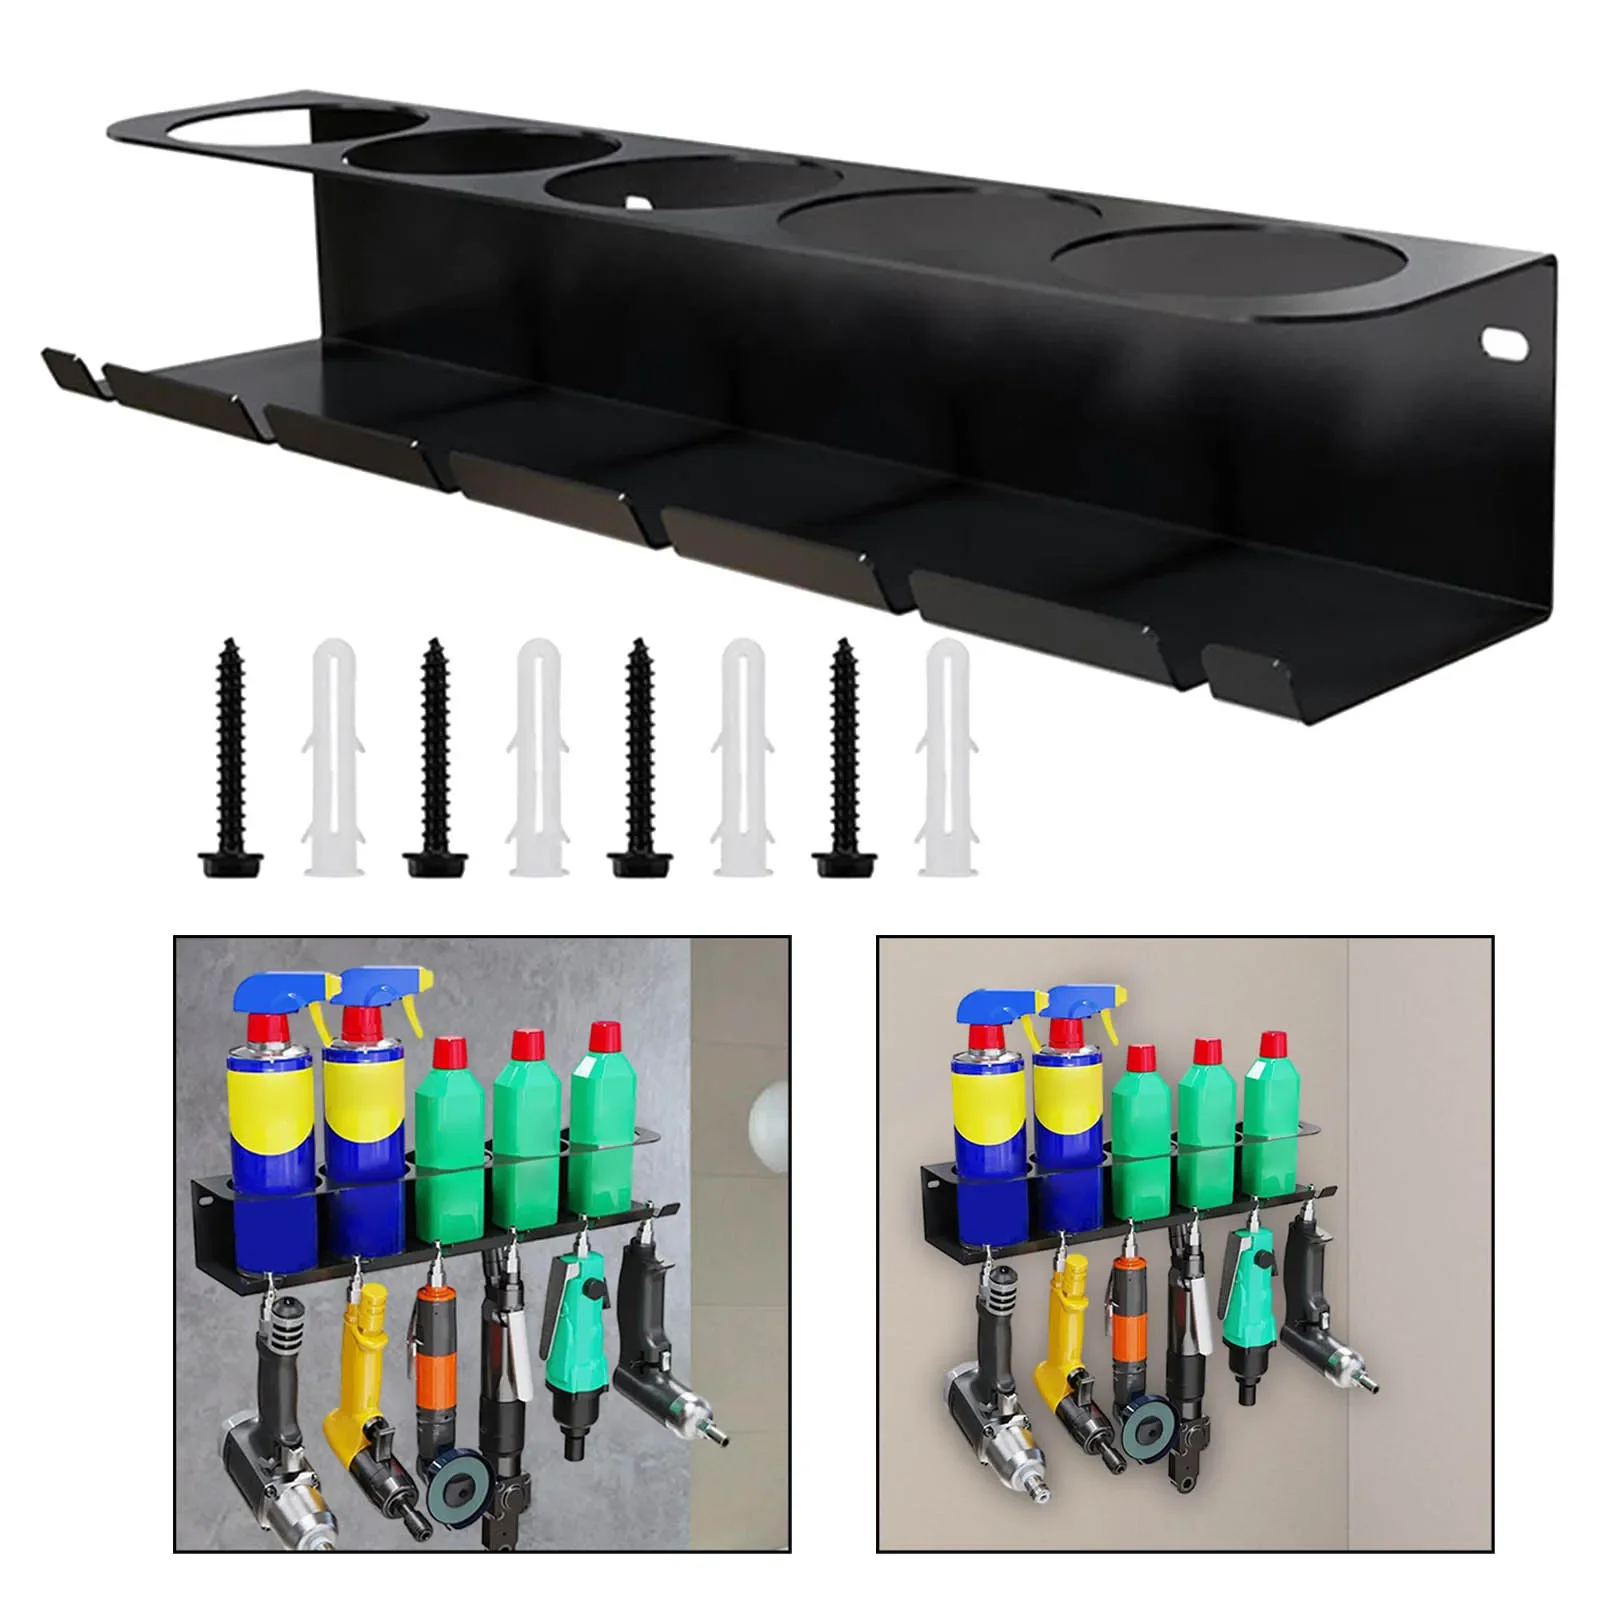 

Rack Wall Heavy Installation Simple Mounted 5 Workspace Duty Hole Spray Organizer Can Bracket Tool Storage Garage for Power And